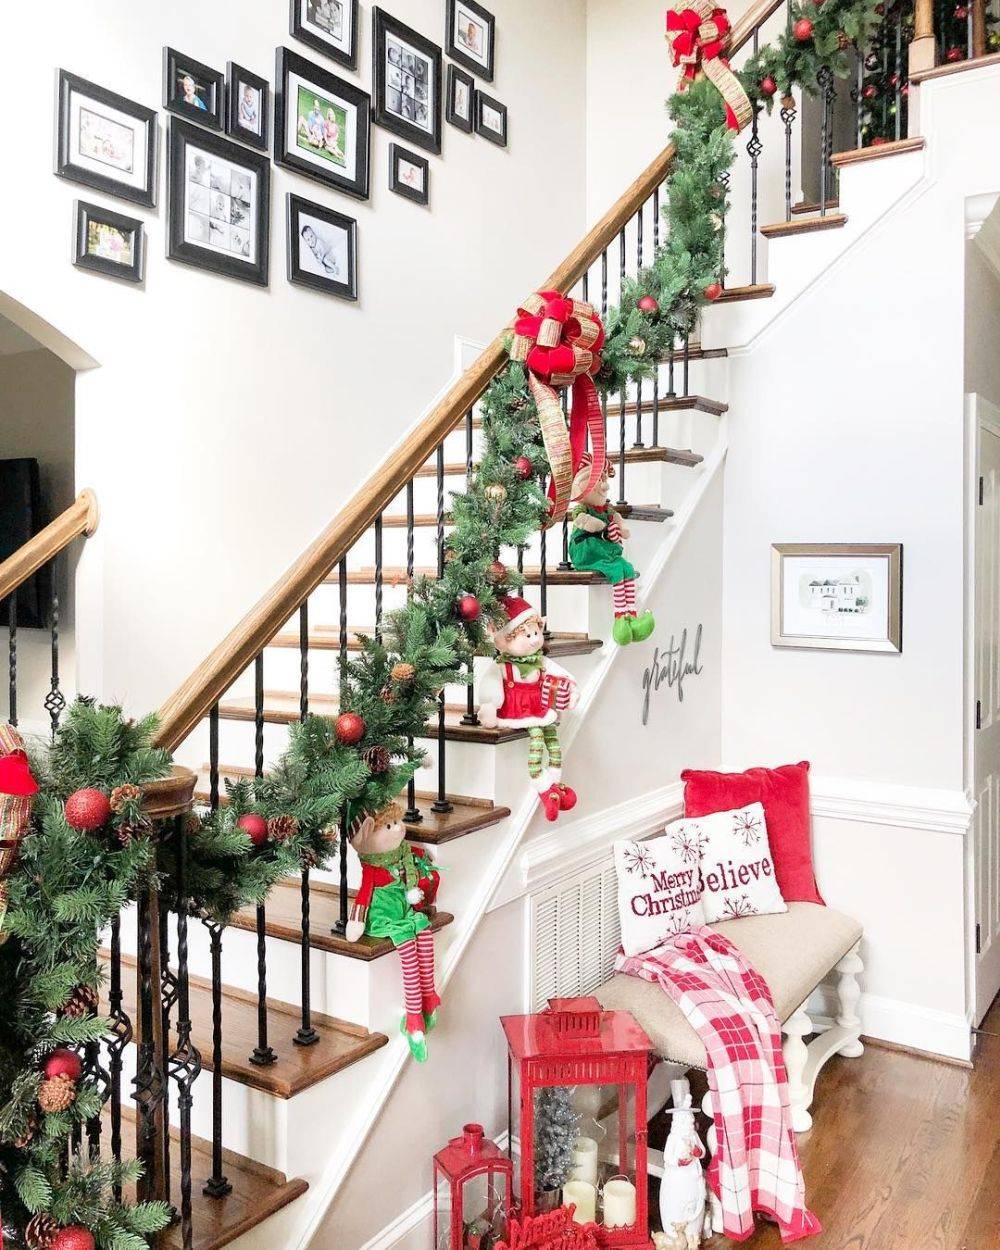 Fun-way-to-decorate-the-entry-with-stairs-using-a-Christmas-garland-and-some-elves-38161